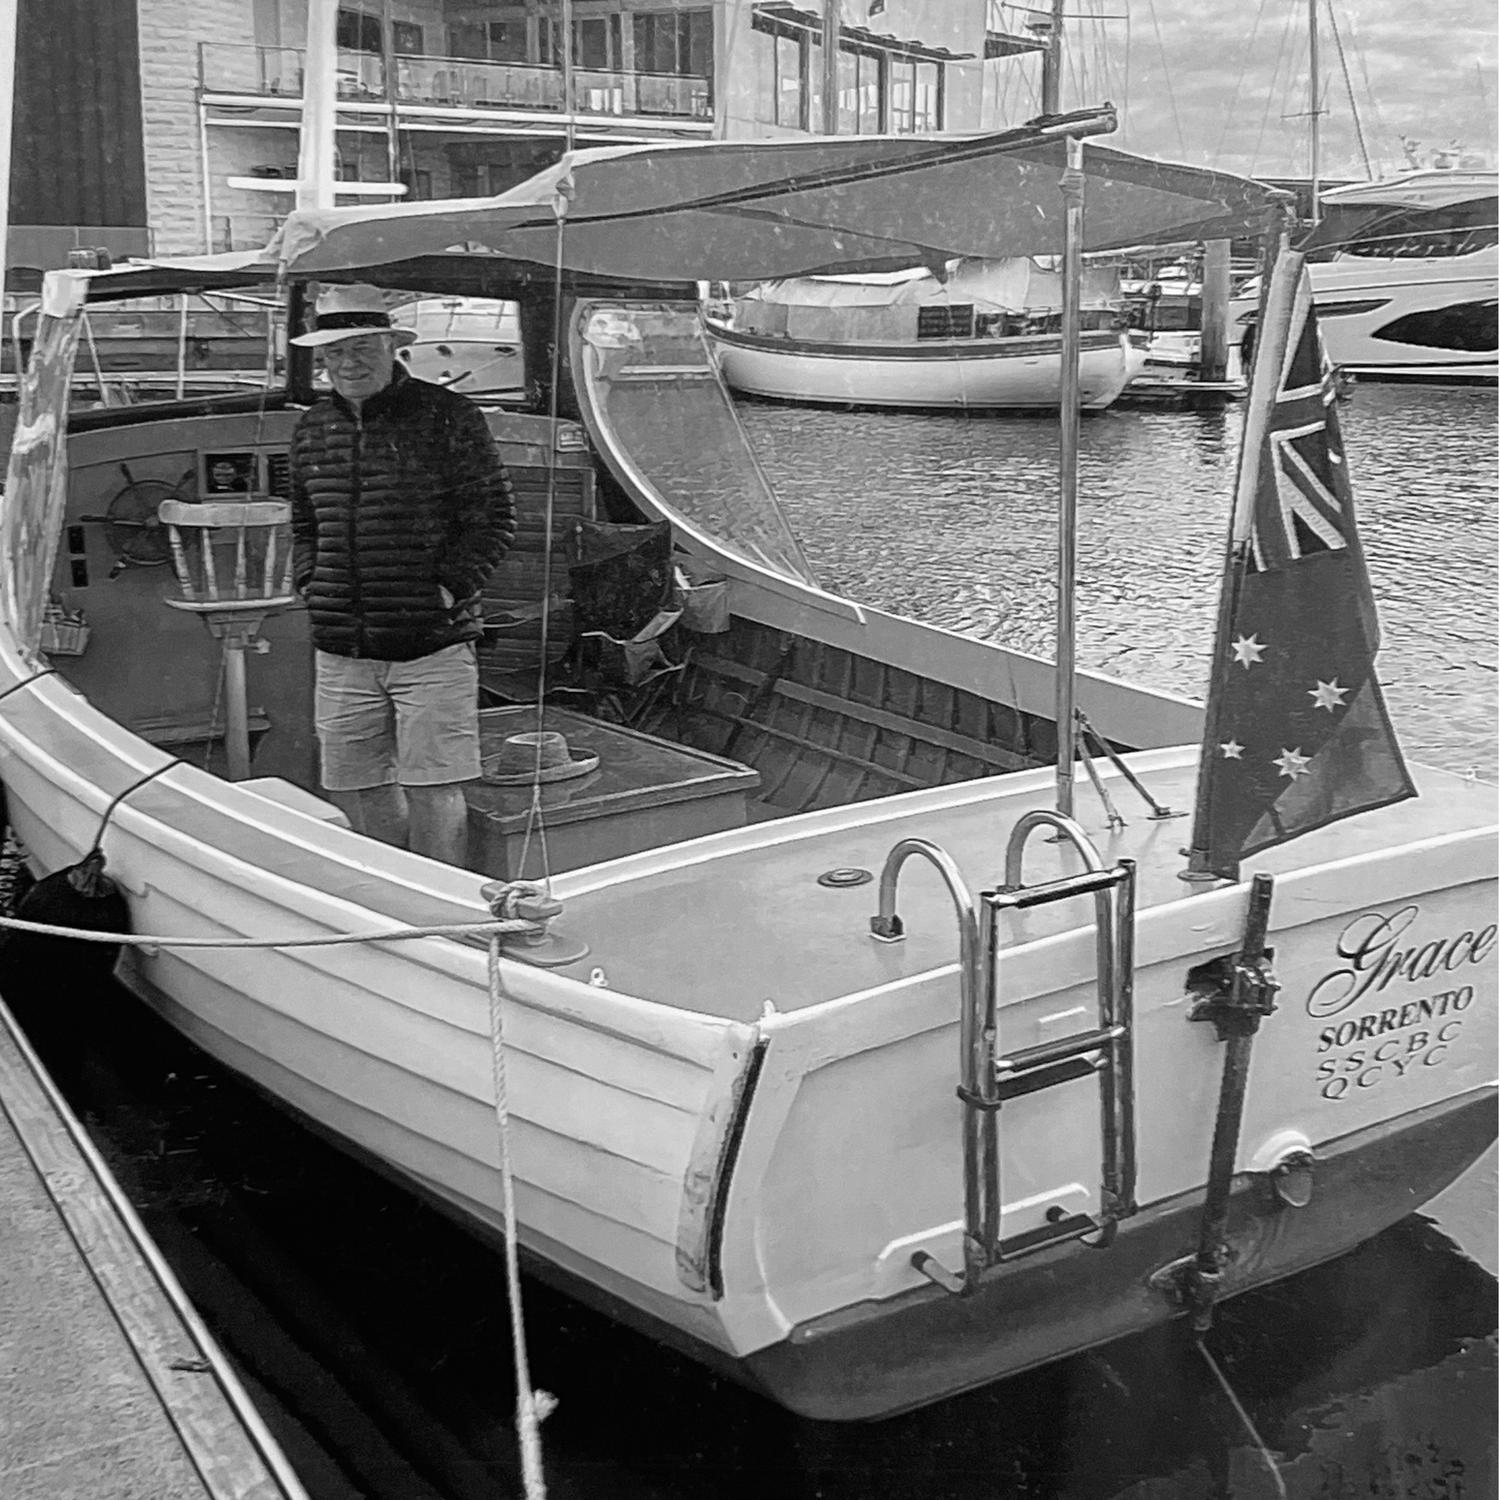 timber yacht for sale australia